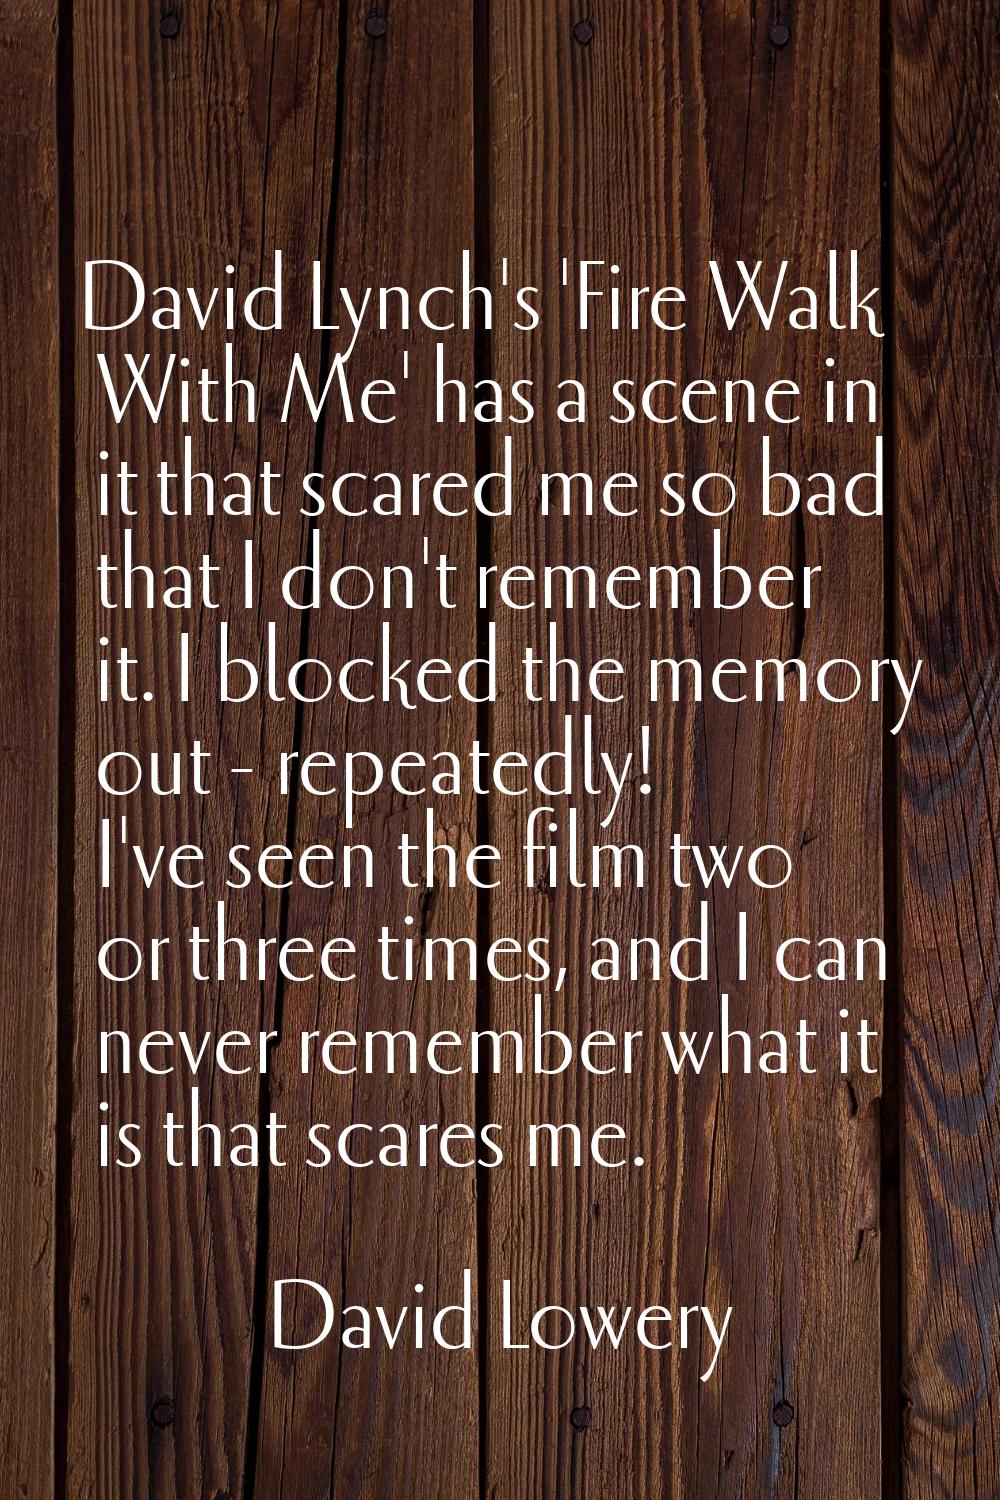 David Lynch's 'Fire Walk With Me' has a scene in it that scared me so bad that I don't remember it.